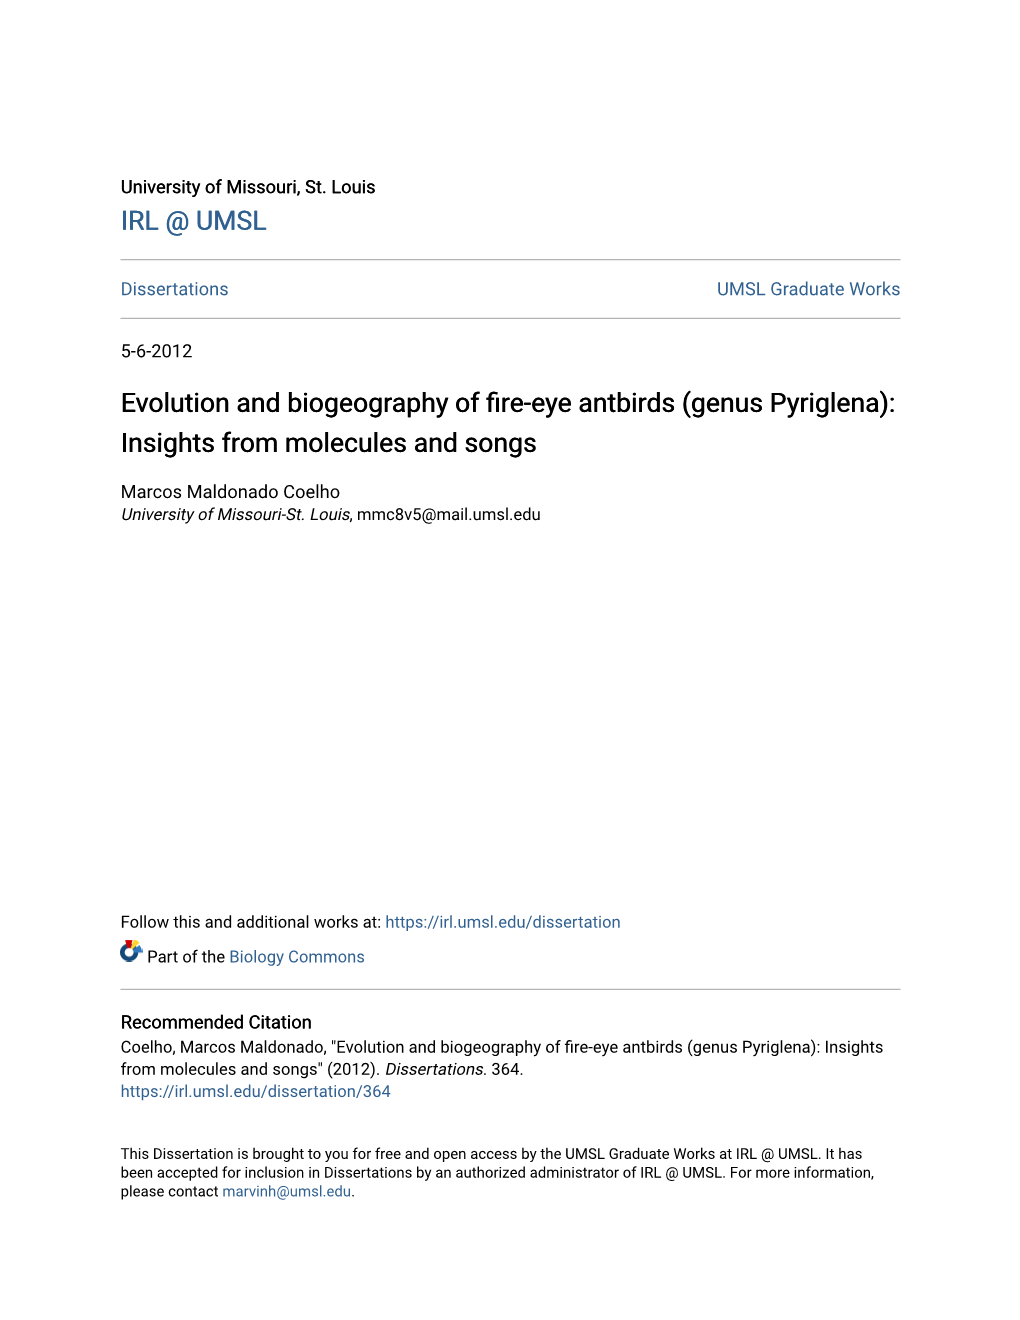 Genus Pyriglena): Insights from Molecules and Songs